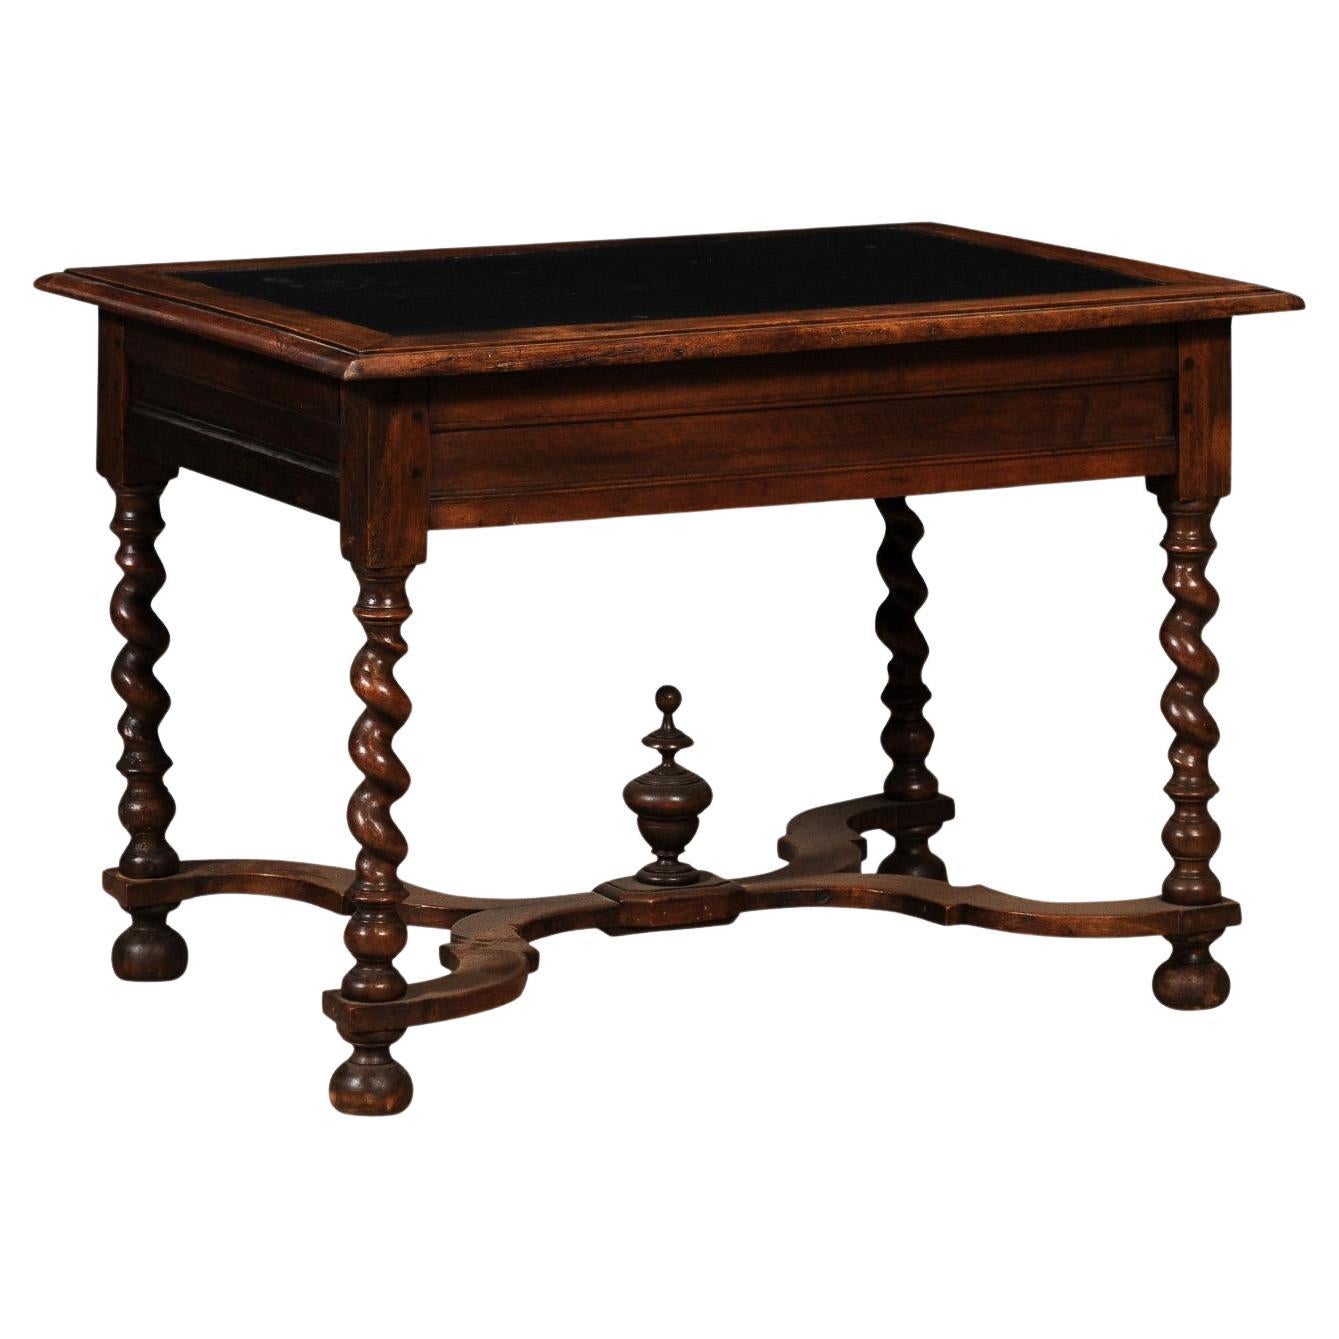 Louis XIII Period 1630s Carved Walnut Barley Twist Table with Black Painted Top For Sale